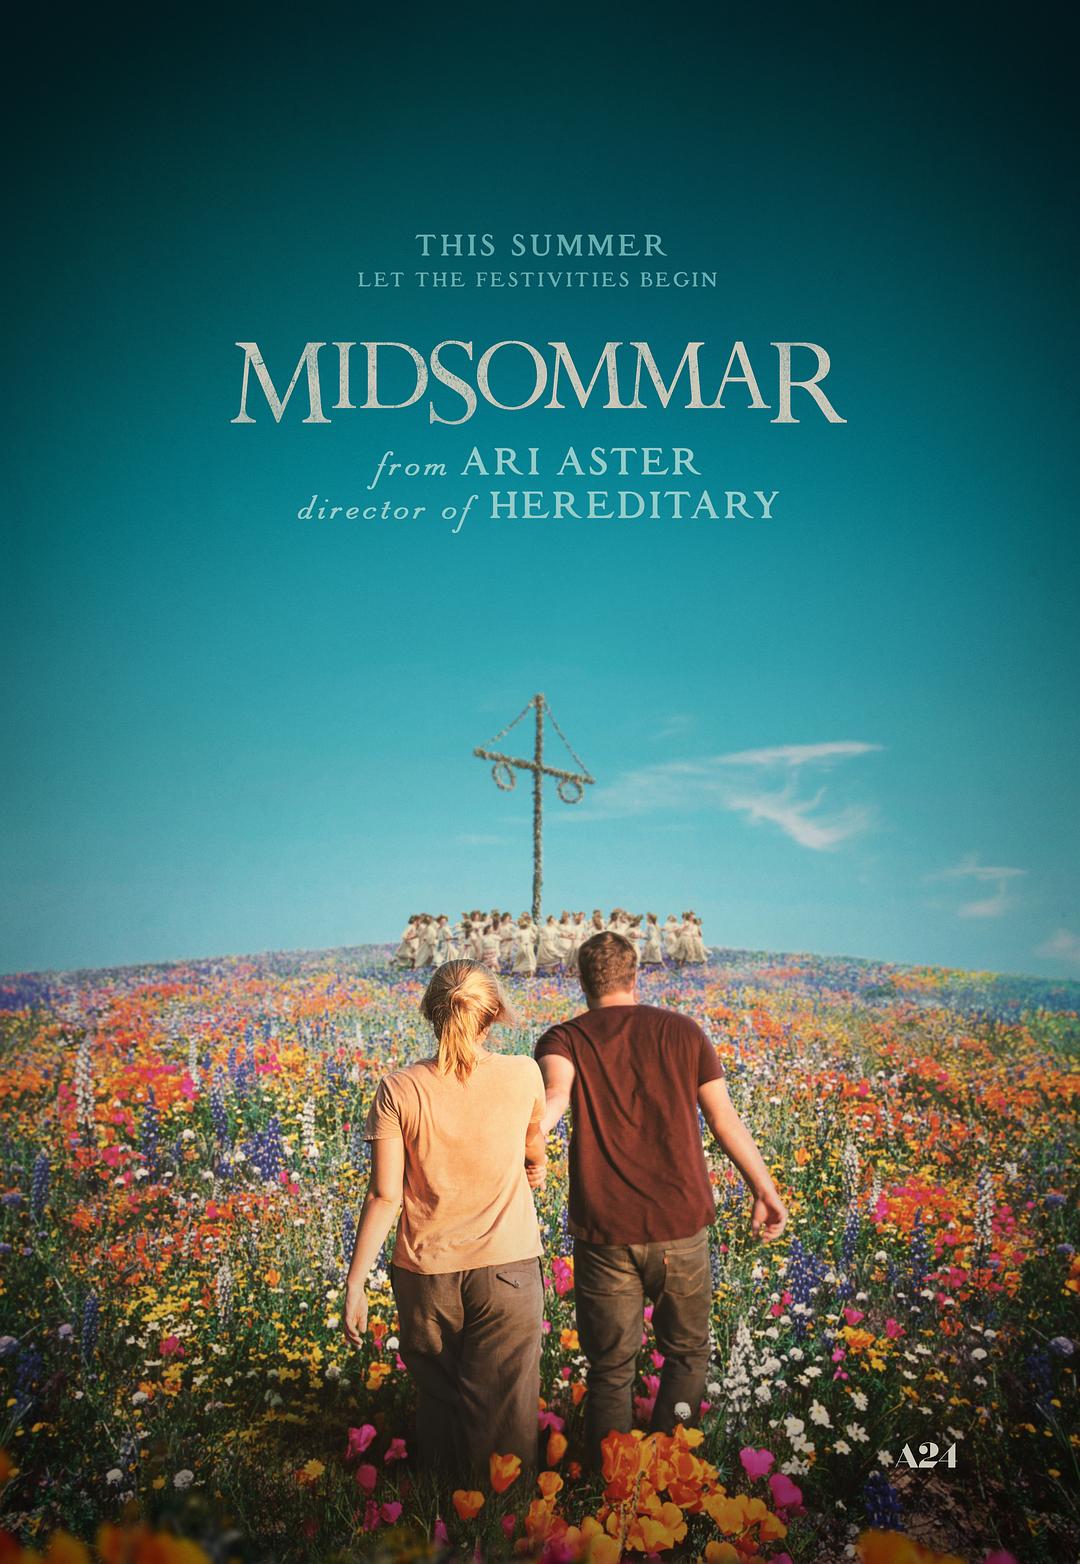 ҹ/ Midsommar.2019.DC.1080p.BluRay.REMUX.AVC.DTS-HD.MA.5.1-FGT 37.62GB-1.png